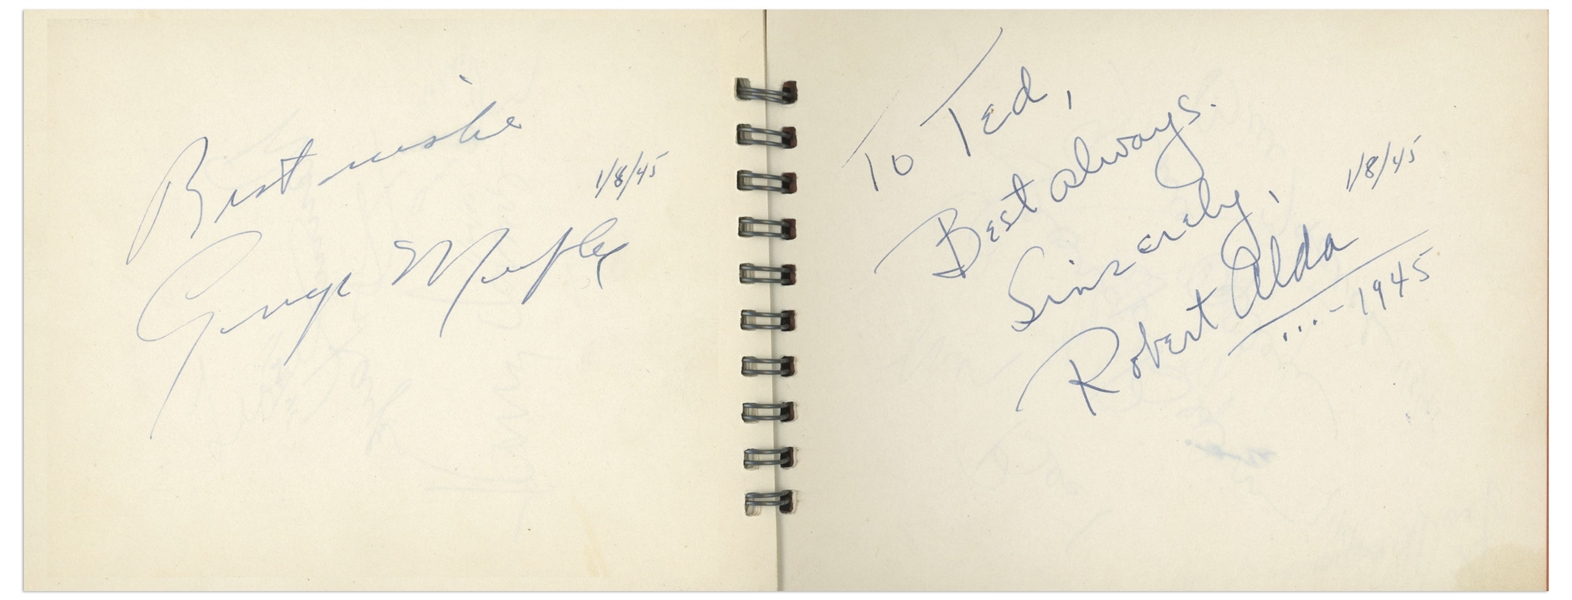 Hollywood Autograph Book Full of Golden Age Celebrity Signatures -- Elizabeth Taylor, Shirley Temple, Bing Crosby, George Burns & More